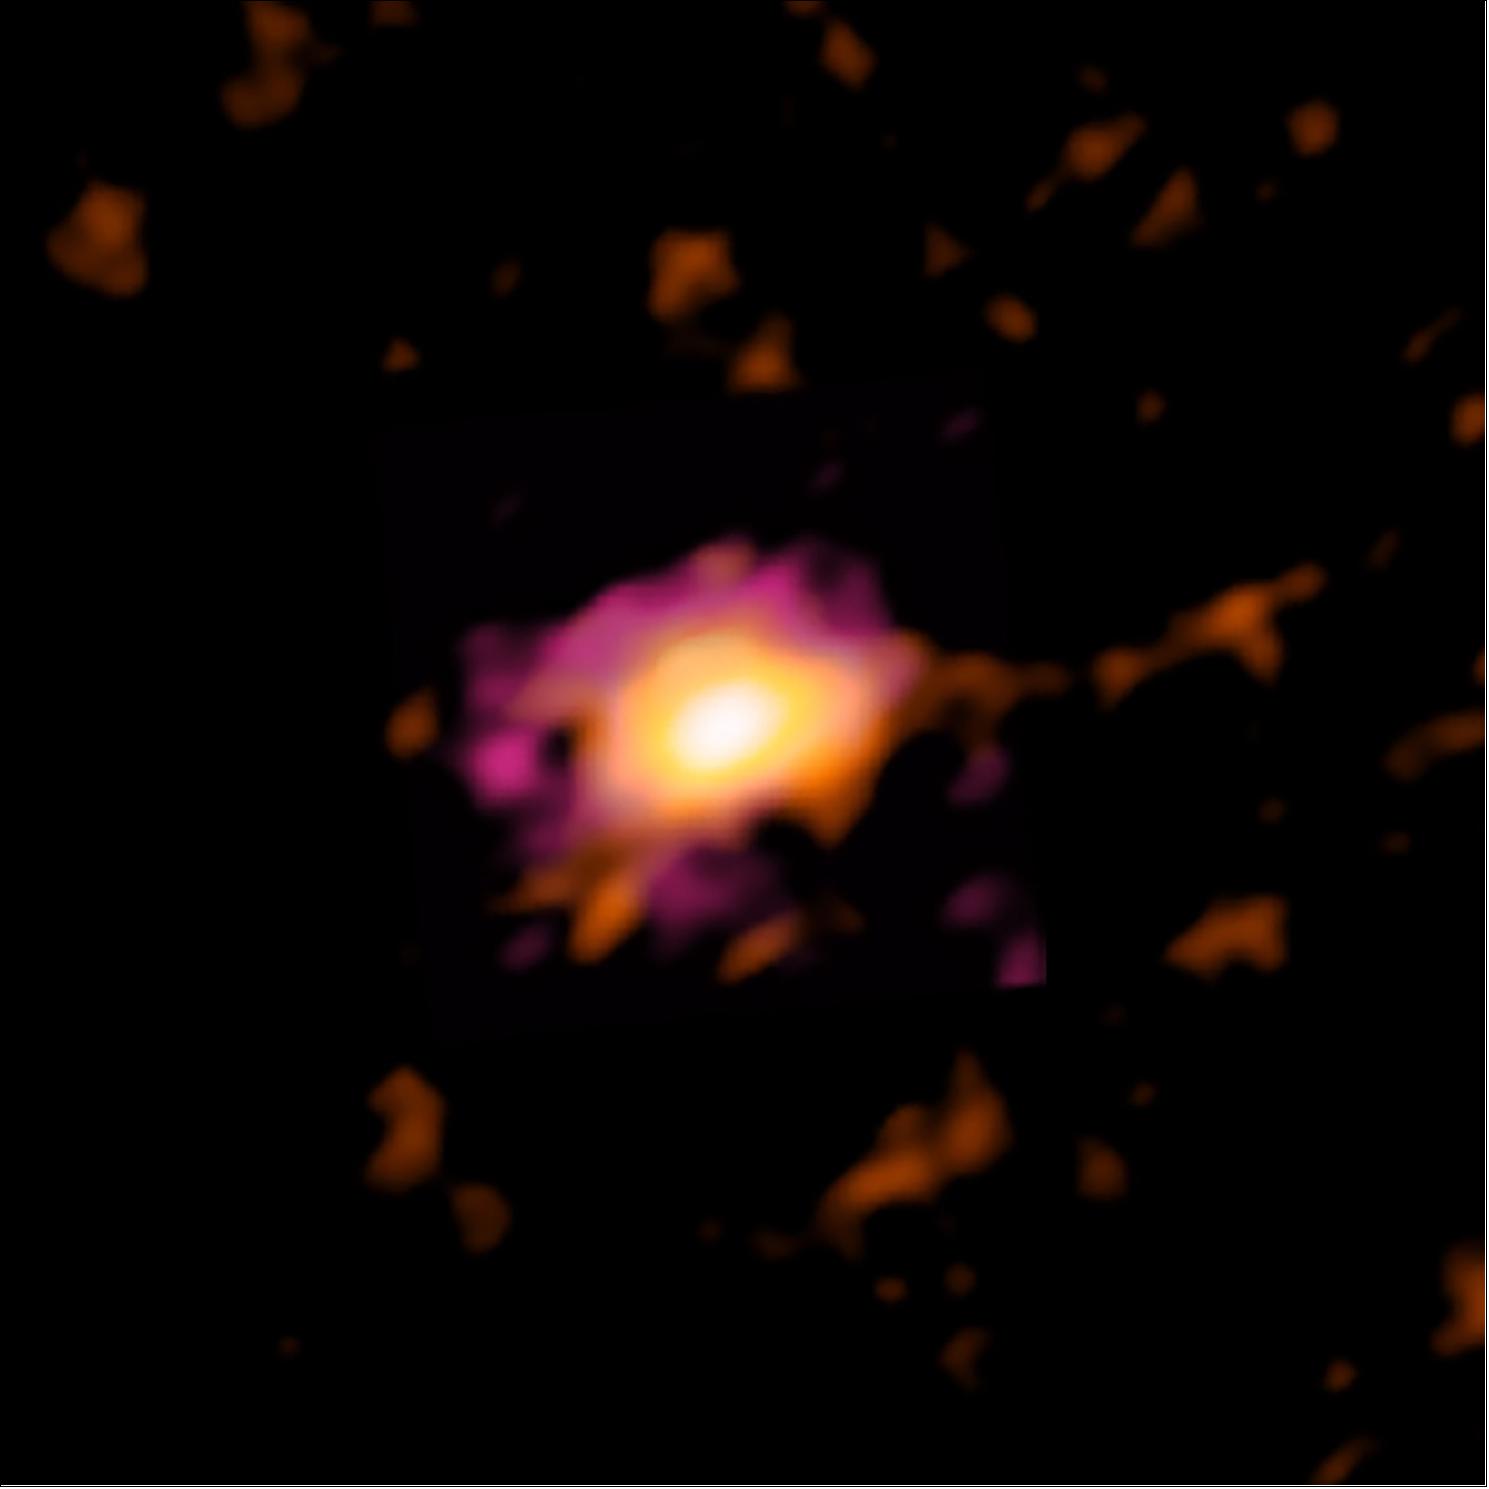 Figure 64: ALMA radio image of the Wolfe Disk, seen when the universe was only ten percent of its current age (image credit: ALMA (ESO/NAOJ/NRAO), M. Neeleman; NRAO/AUI/NSF, S. Dagnello)